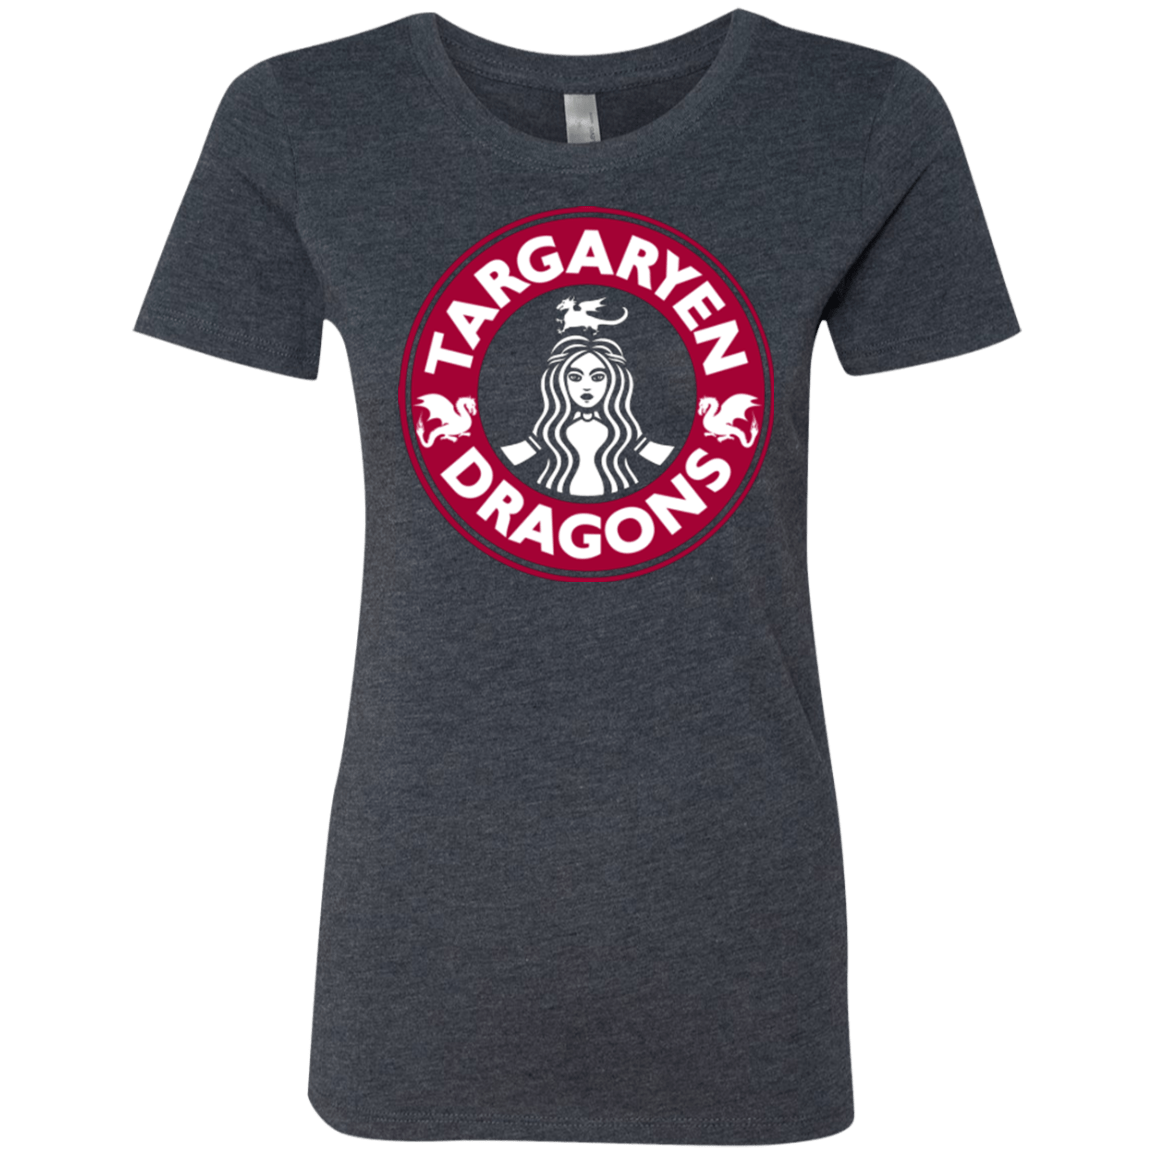 T-Shirts Vintage Navy / Small Always Hot Women's Triblend T-Shirt